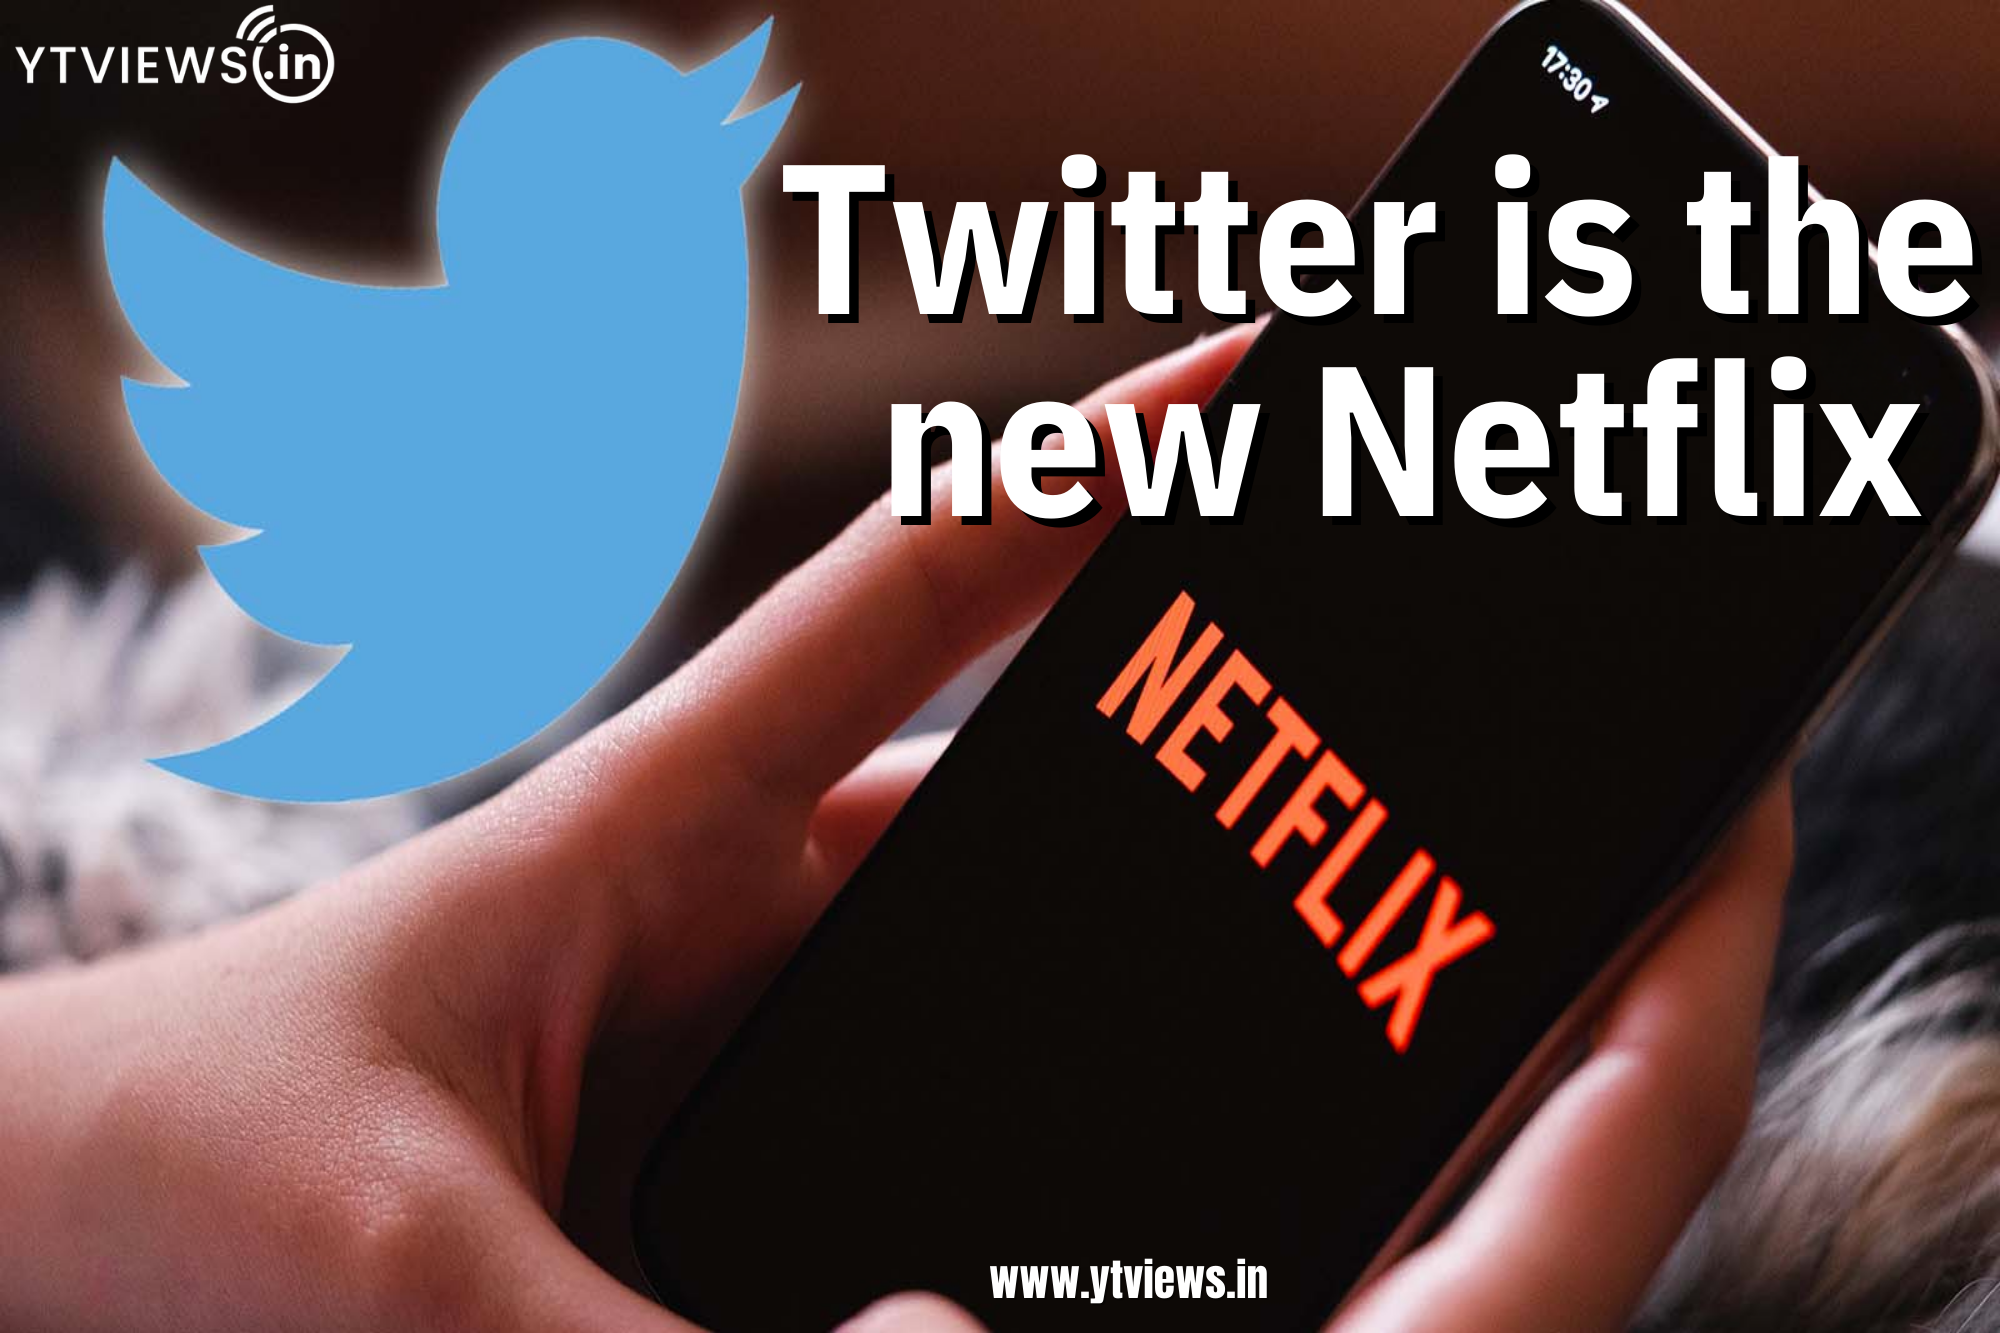 Elon Musk has announced a new feature on Twitter which has users calling it the “New Netflix”